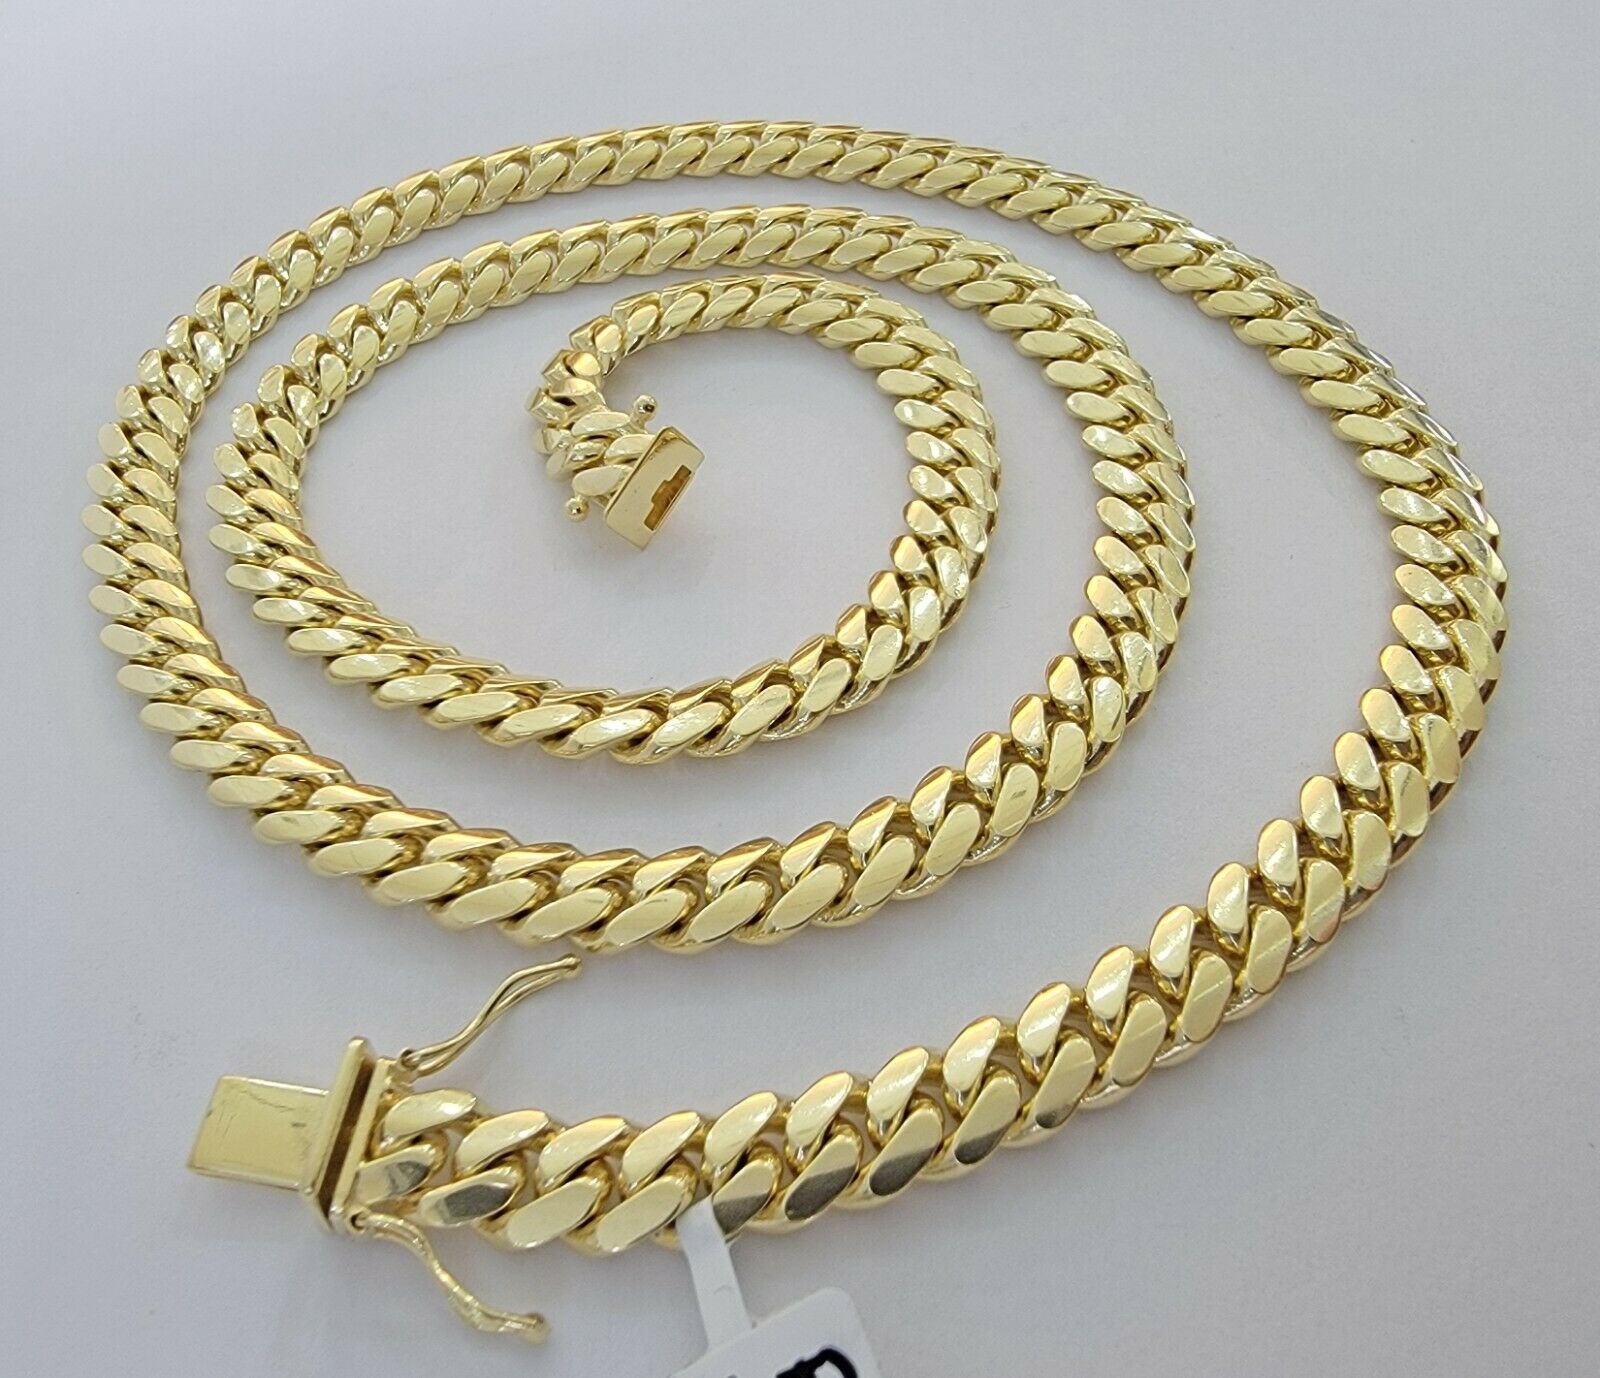 SWTOOL 60 Feets /20 Yards Metal Gold Link Chains, Iron Bulk Curb Chain for  DIY Craft Jewelry Chain Making, 2 Rolls x 10 Yards (Gold)